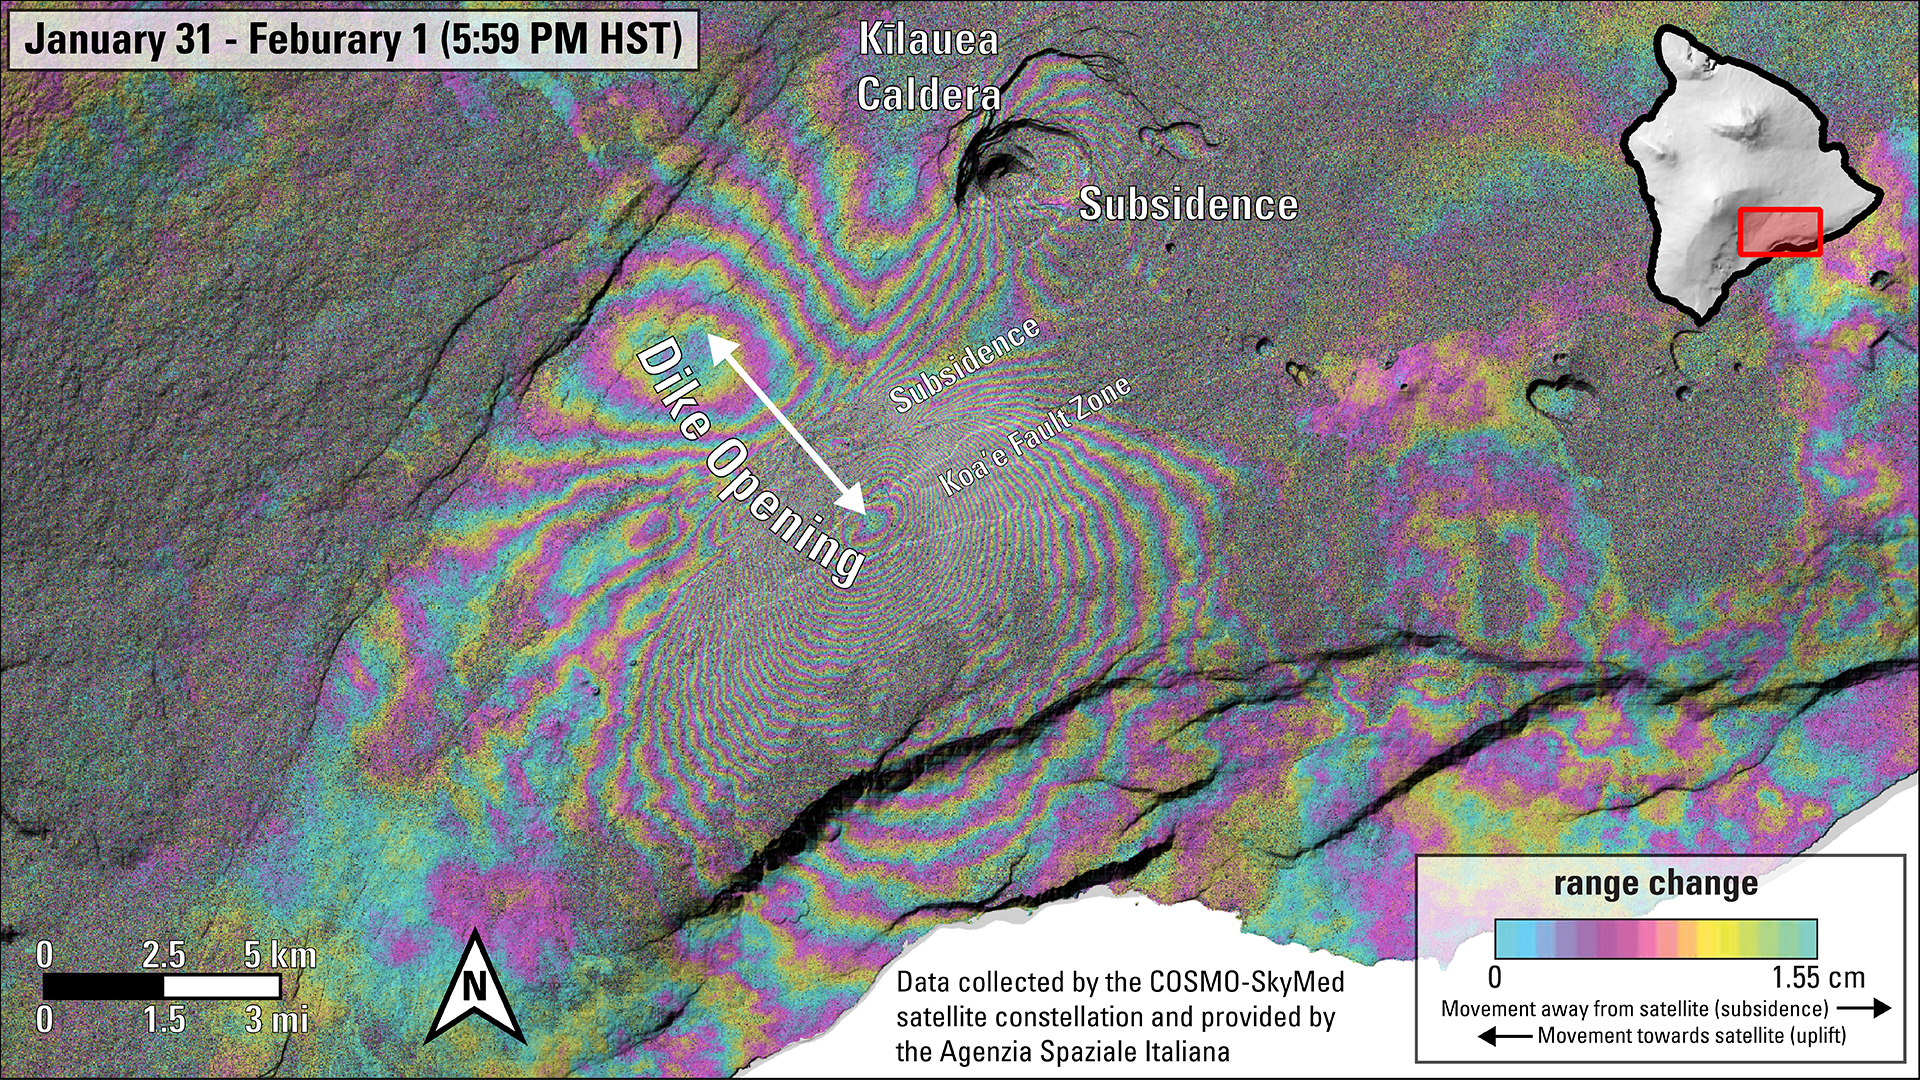 ASI - COSMO-SkyMed images to monitor volcanic activities in Hawaii